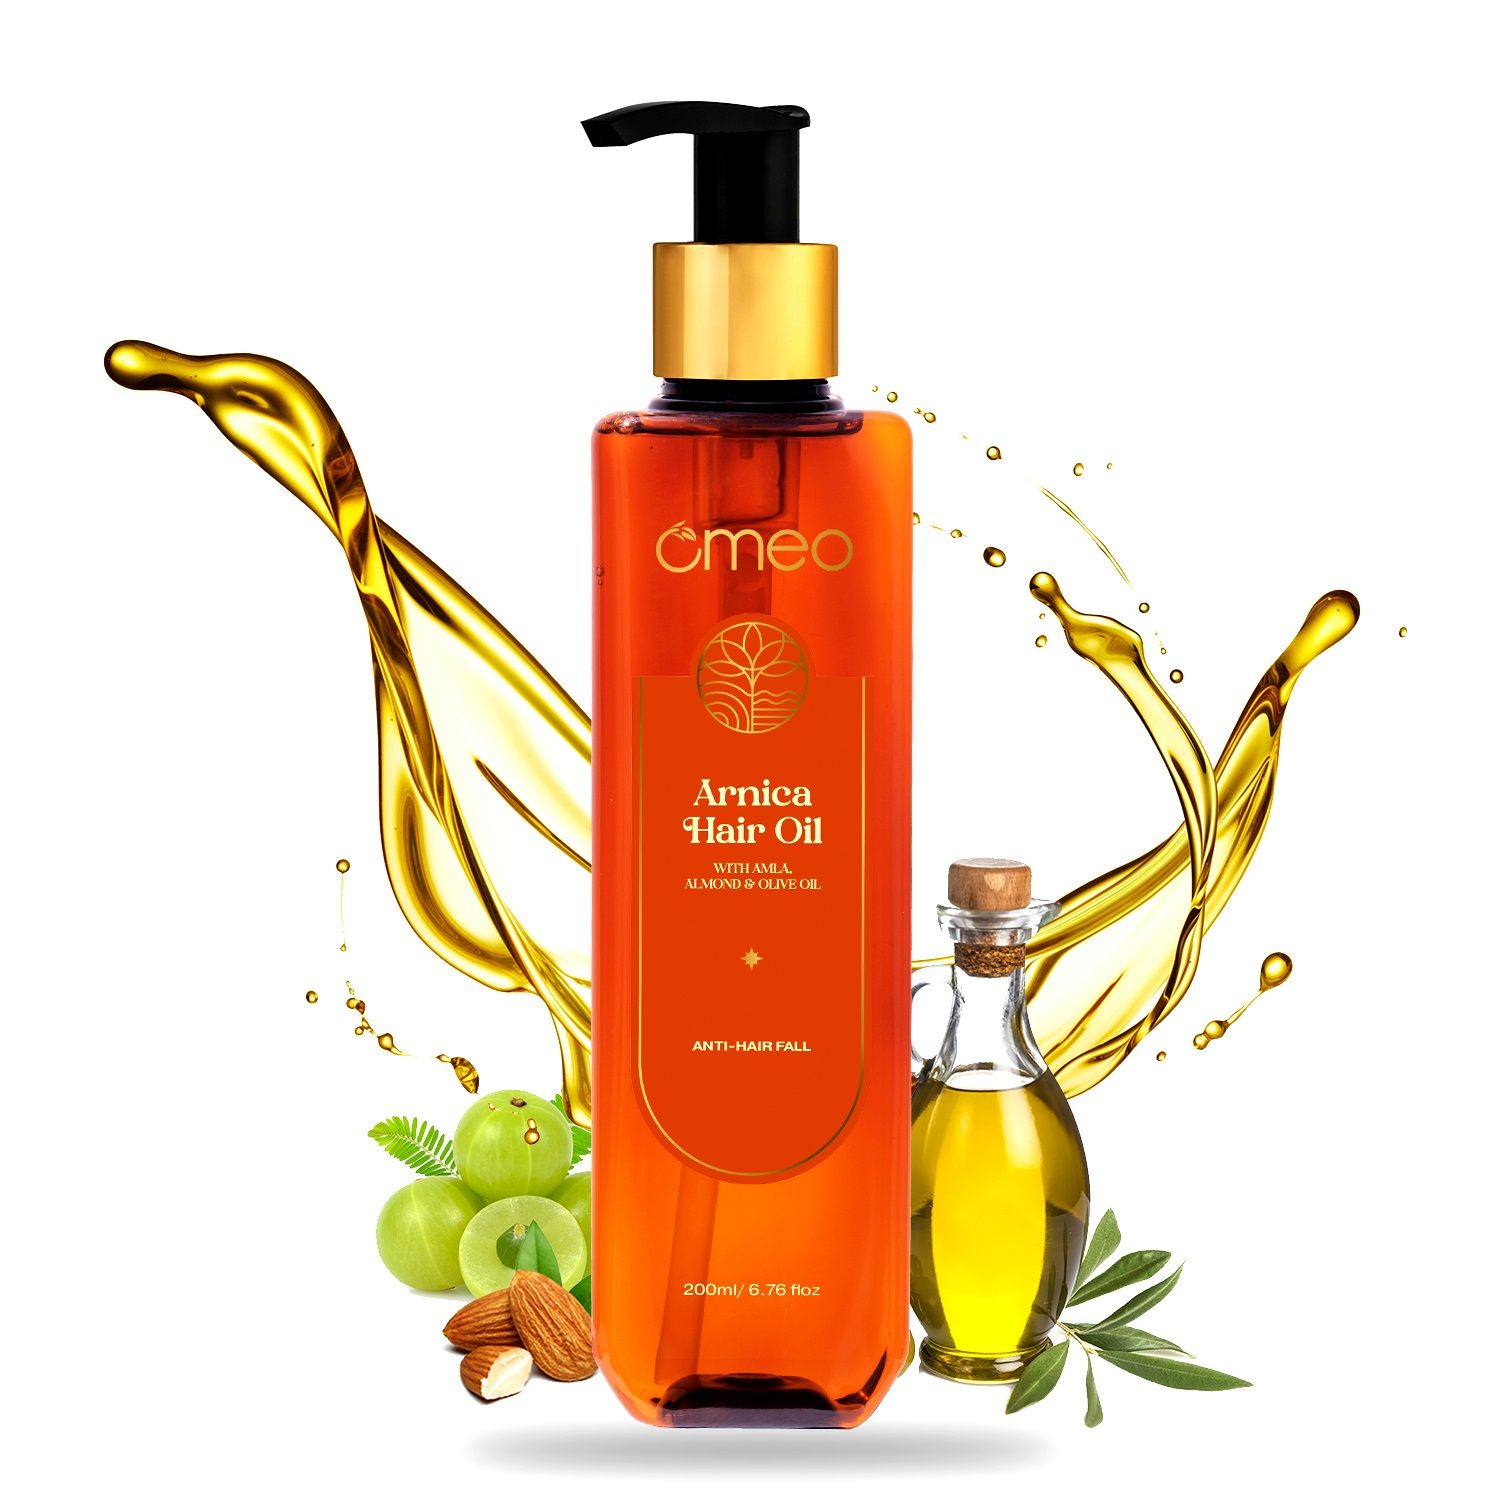 Buy Omeo Arnica Shampoo  Omeo Arnica Hair Oil  Omeo Silk and Shine  Conditioner Online  450 from ShopClues